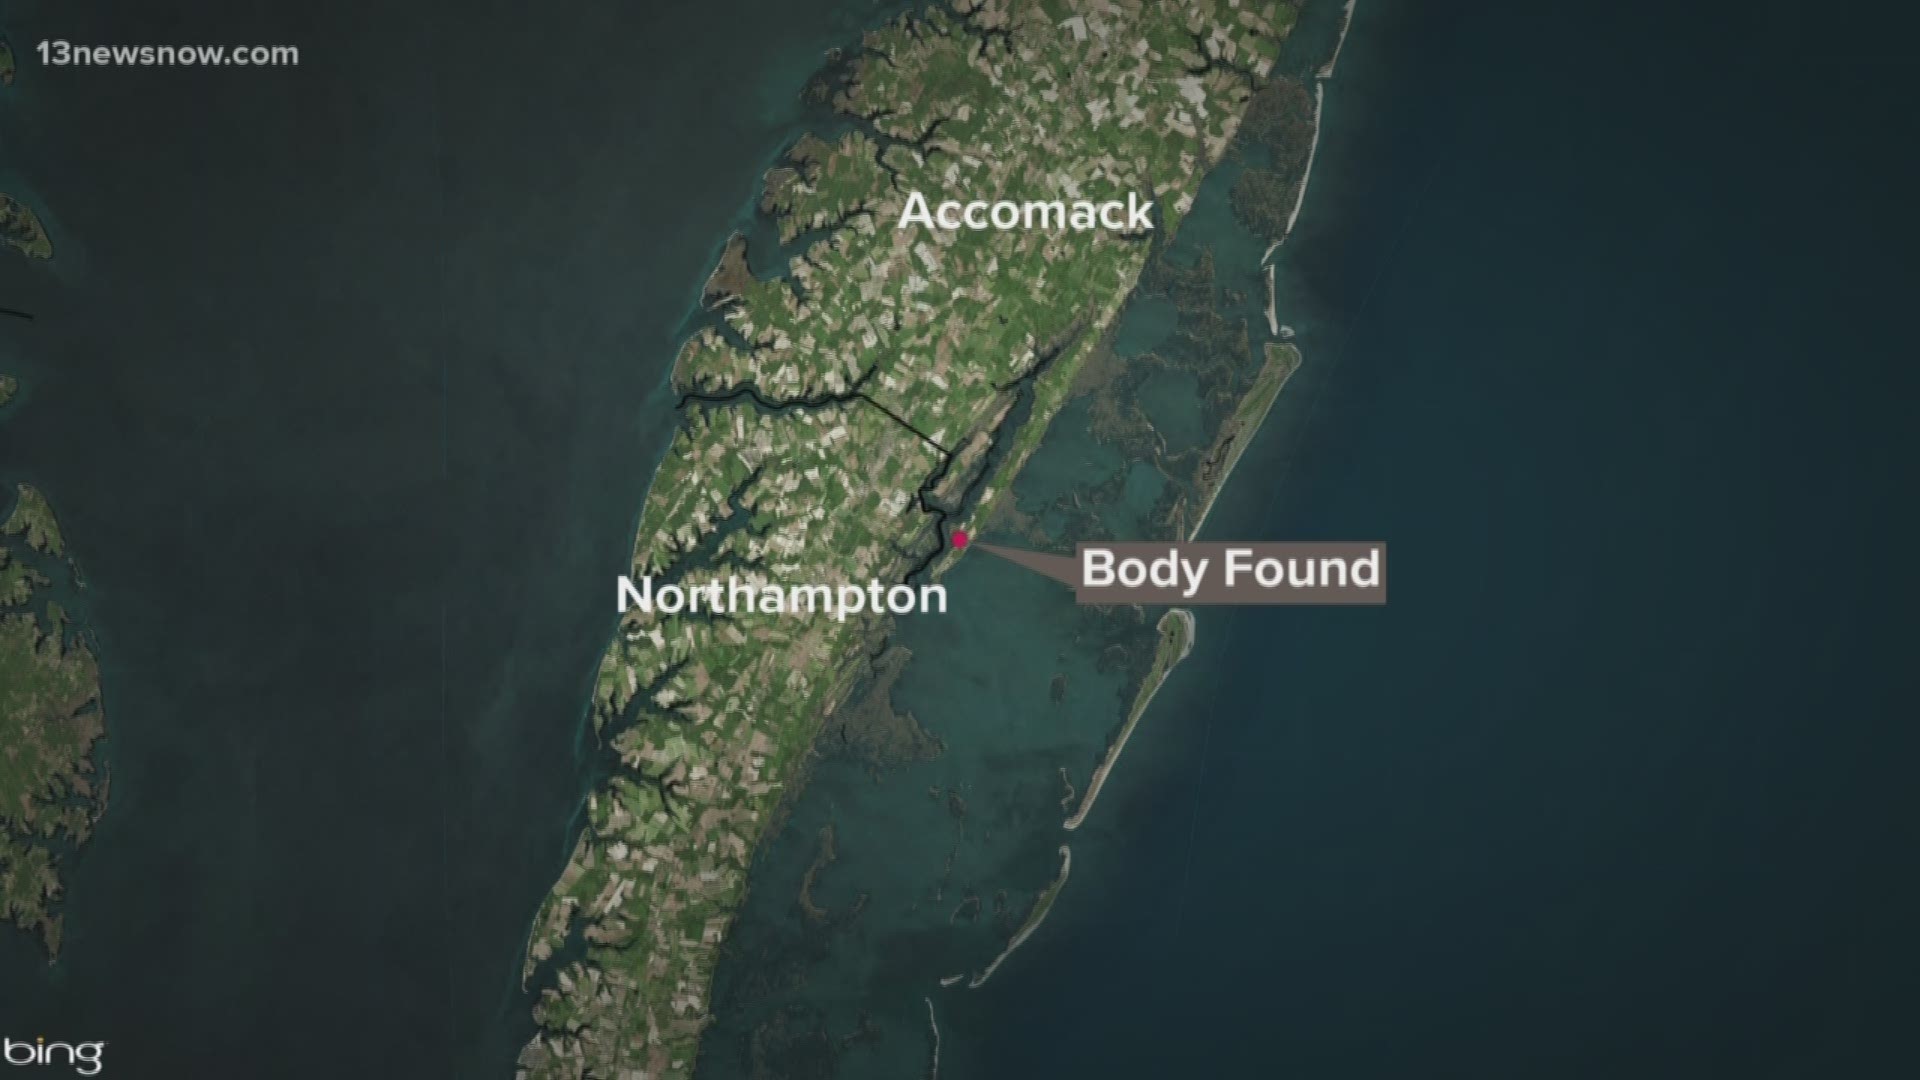 Officials released the identity of a woman who was found near an abandoned car in Accomack County. She died from accidental causes.